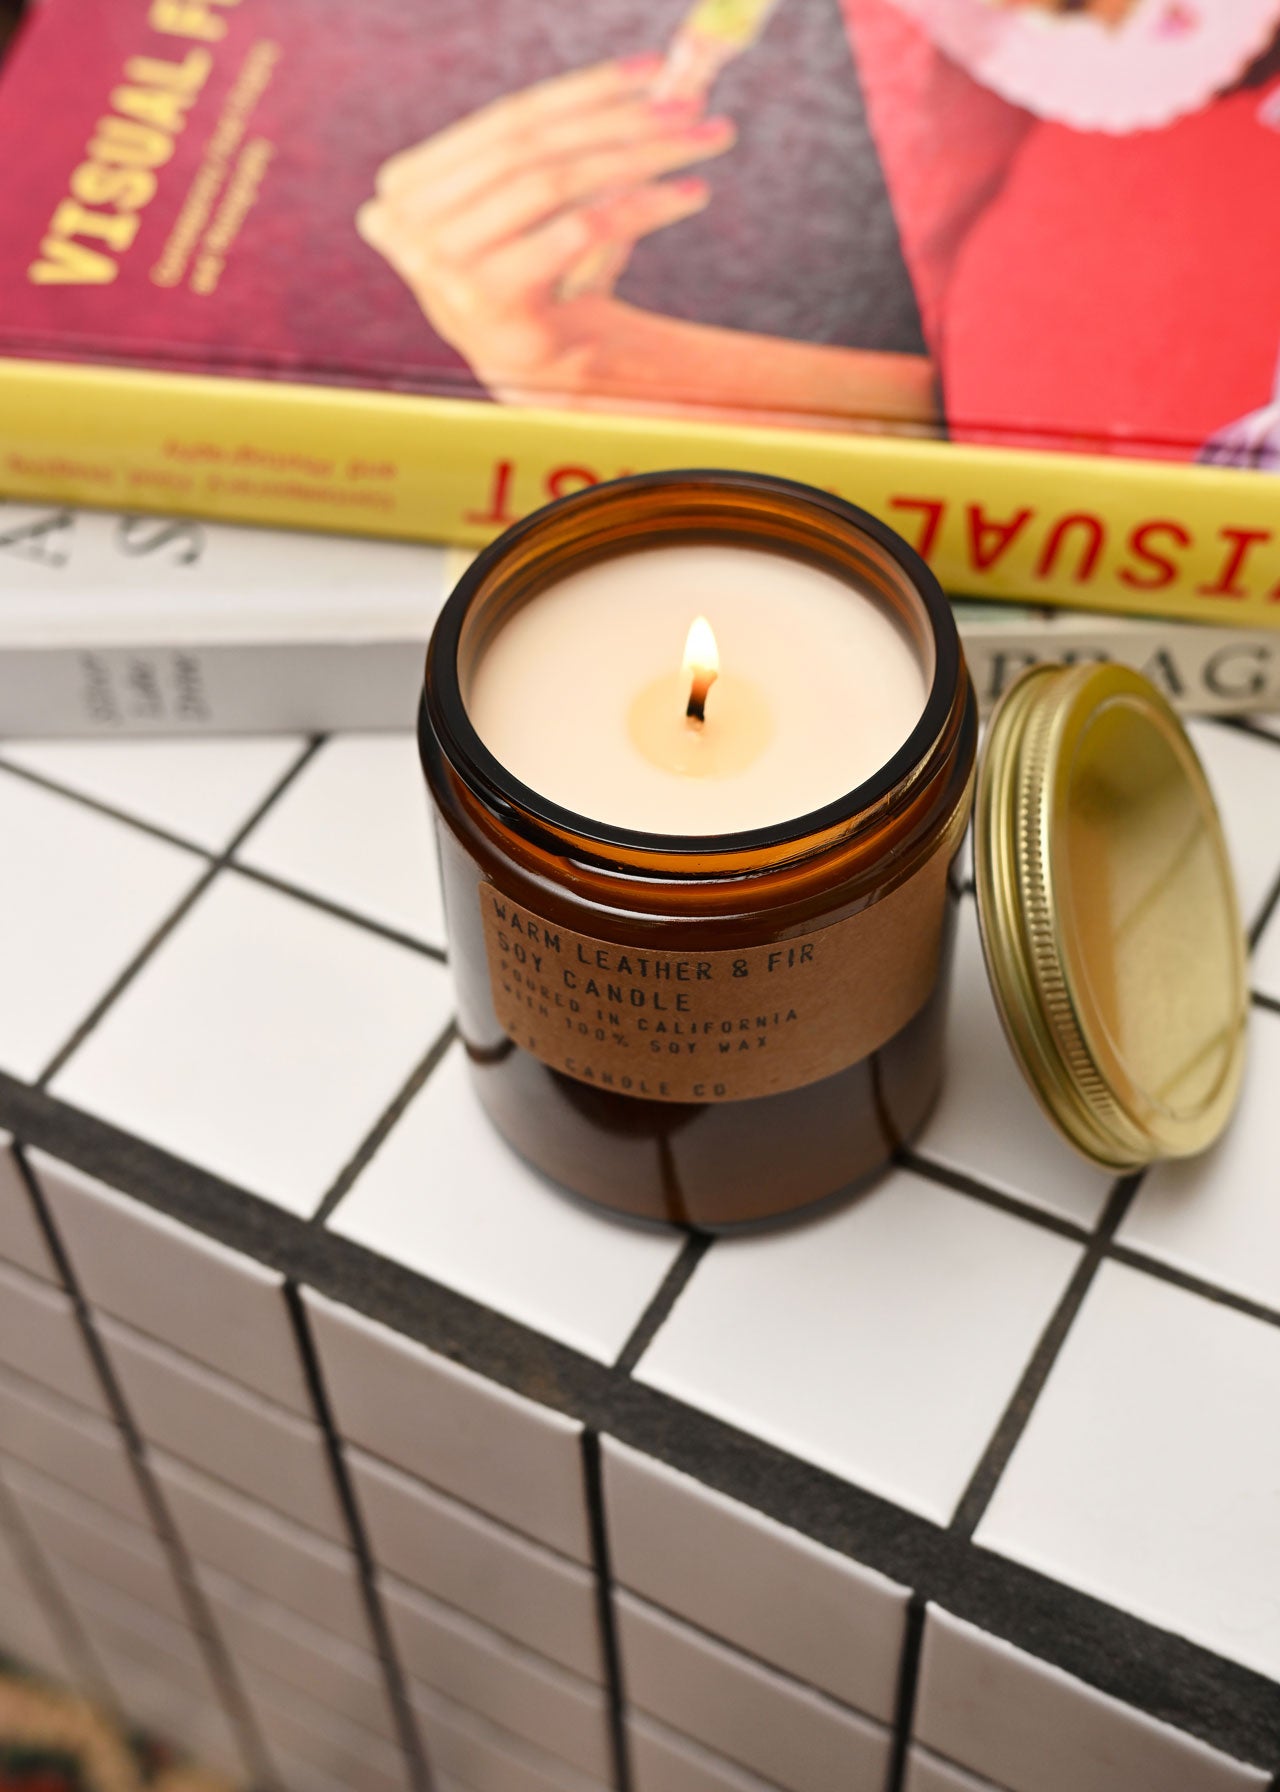 Warm Leather &amp; Fir Soy Candle